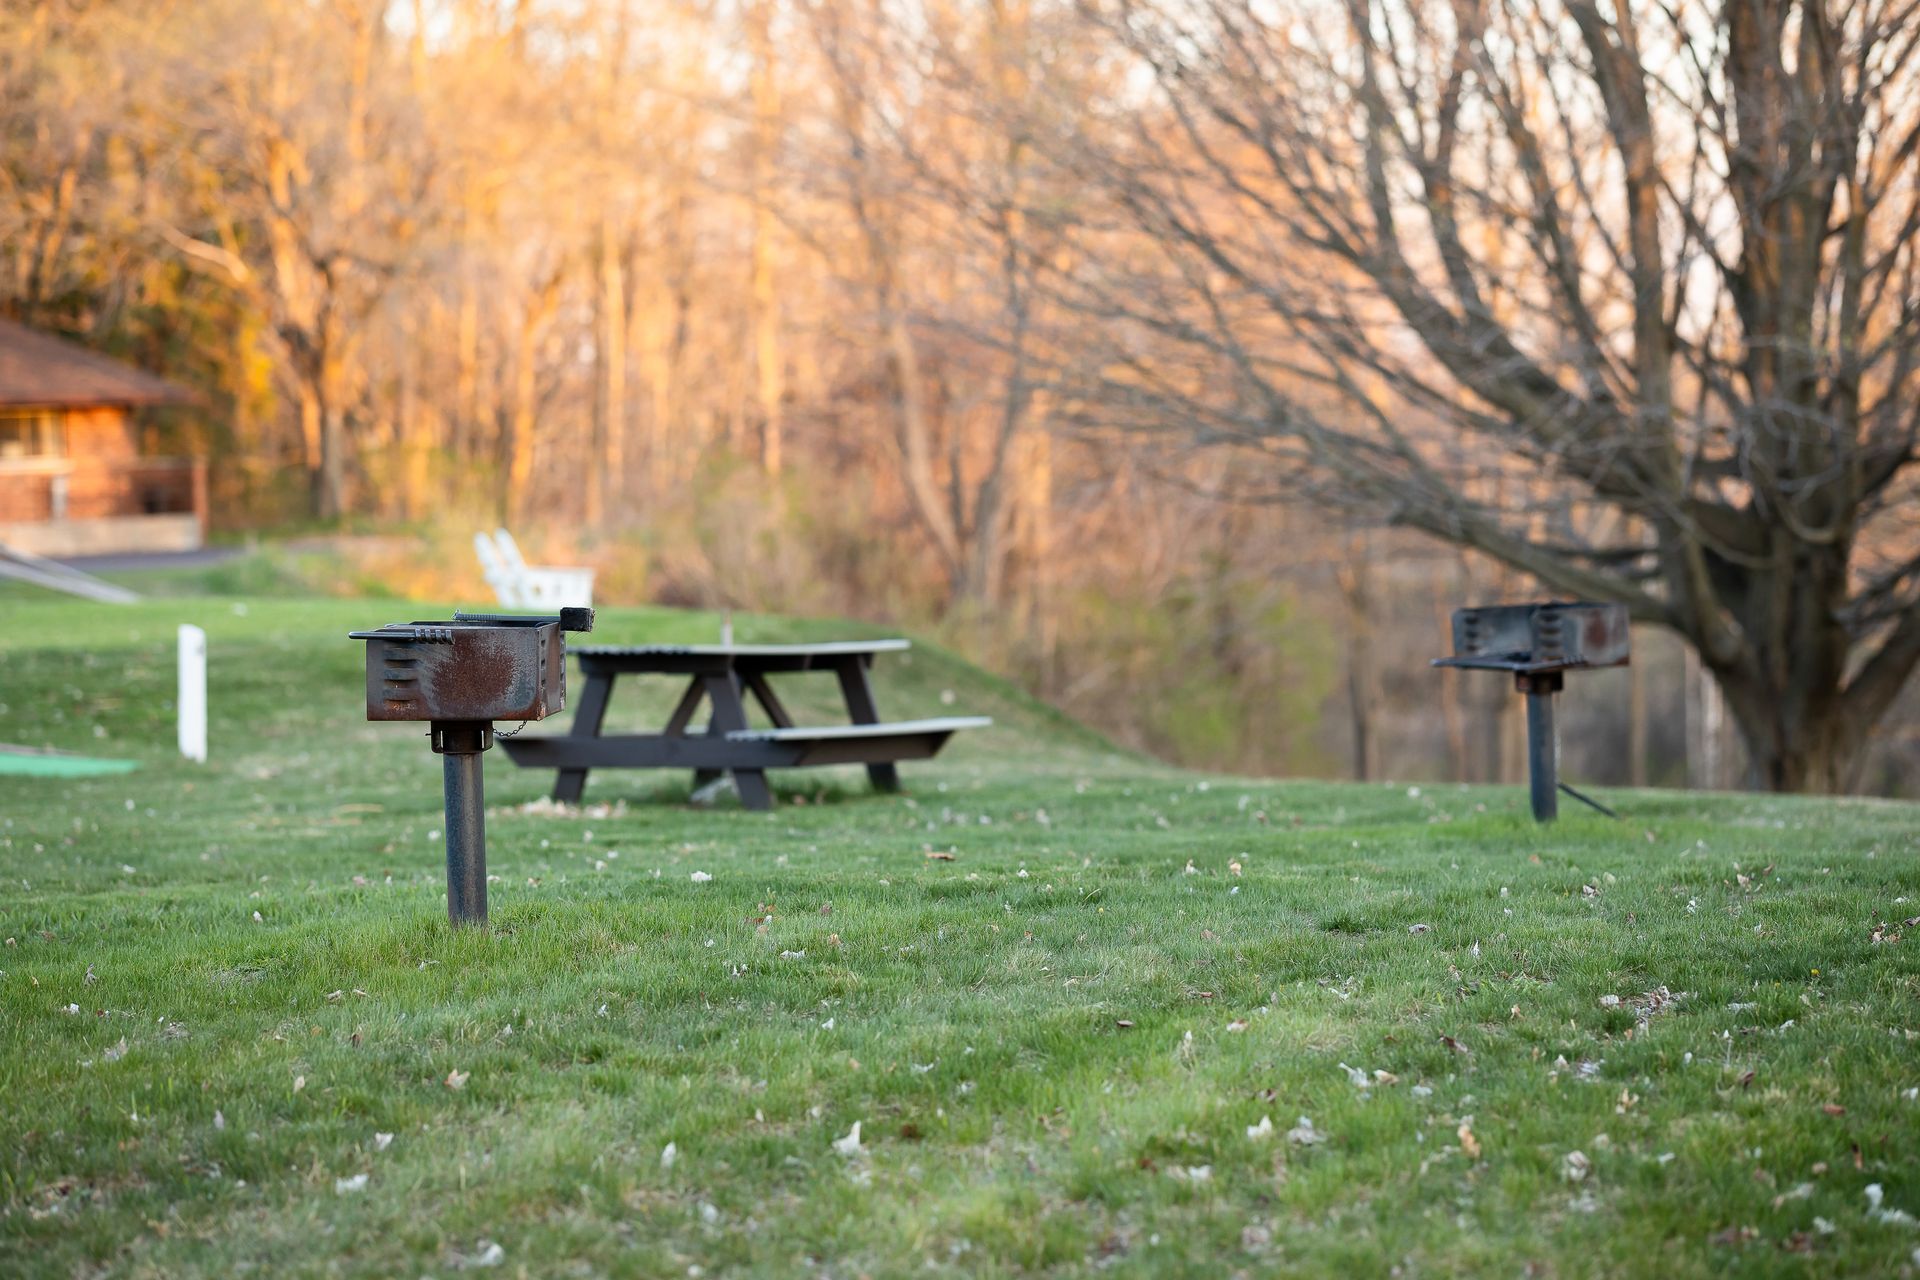 A picnic table and grills in a grassy field.